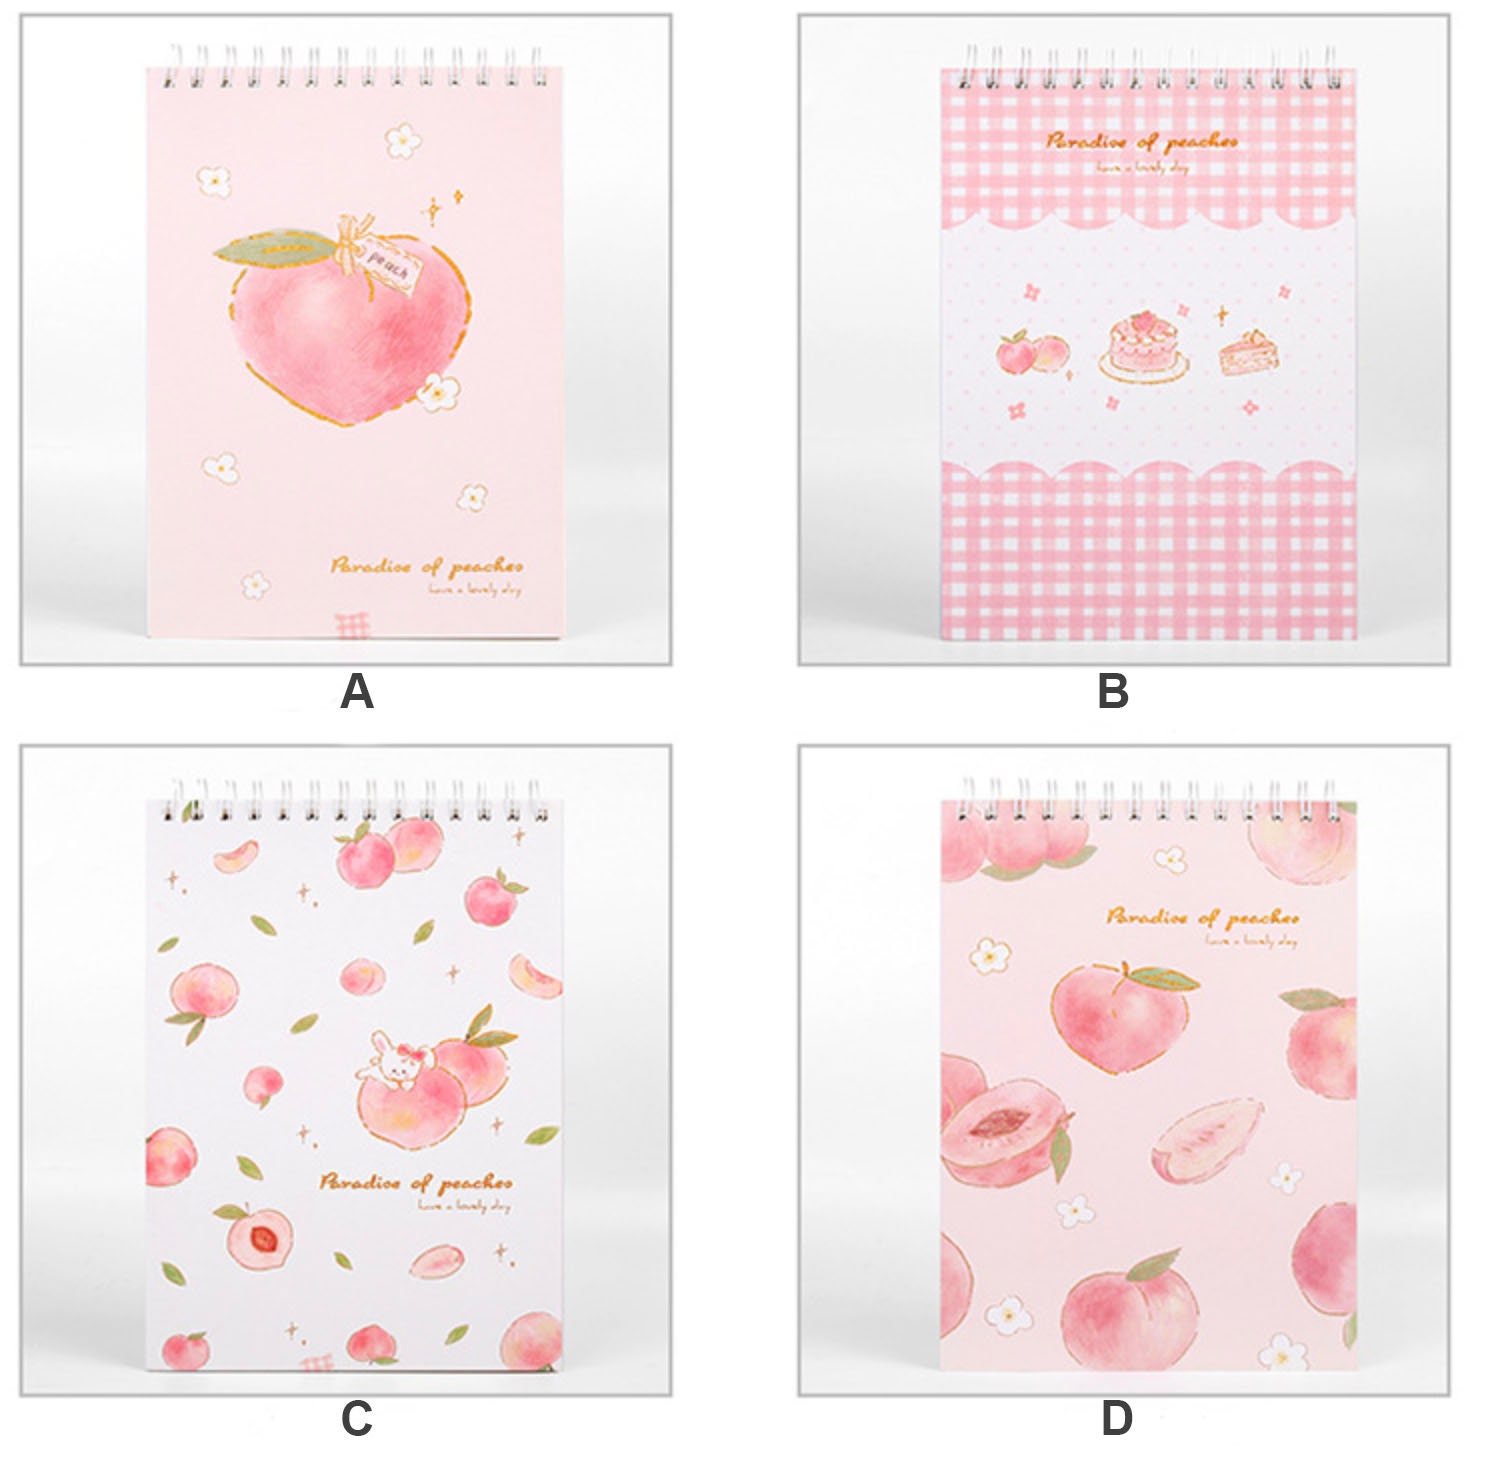 Peach Paradise Sketchbook - Extra Large, One Peach